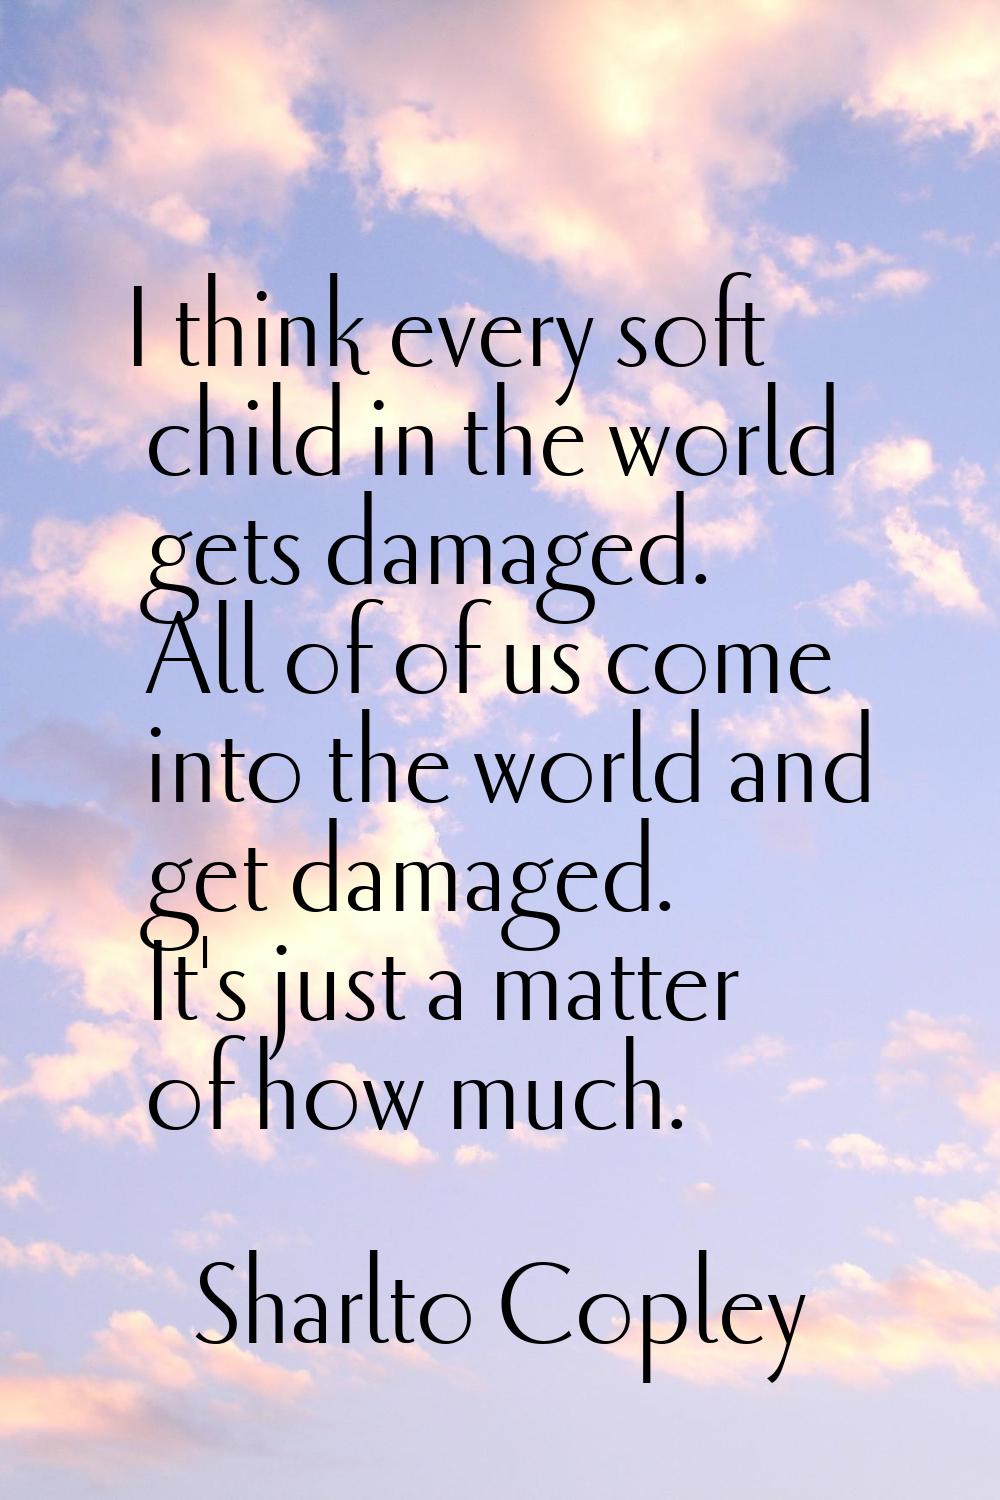 I think every soft child in the world gets damaged. All of of us come into the world and get damage